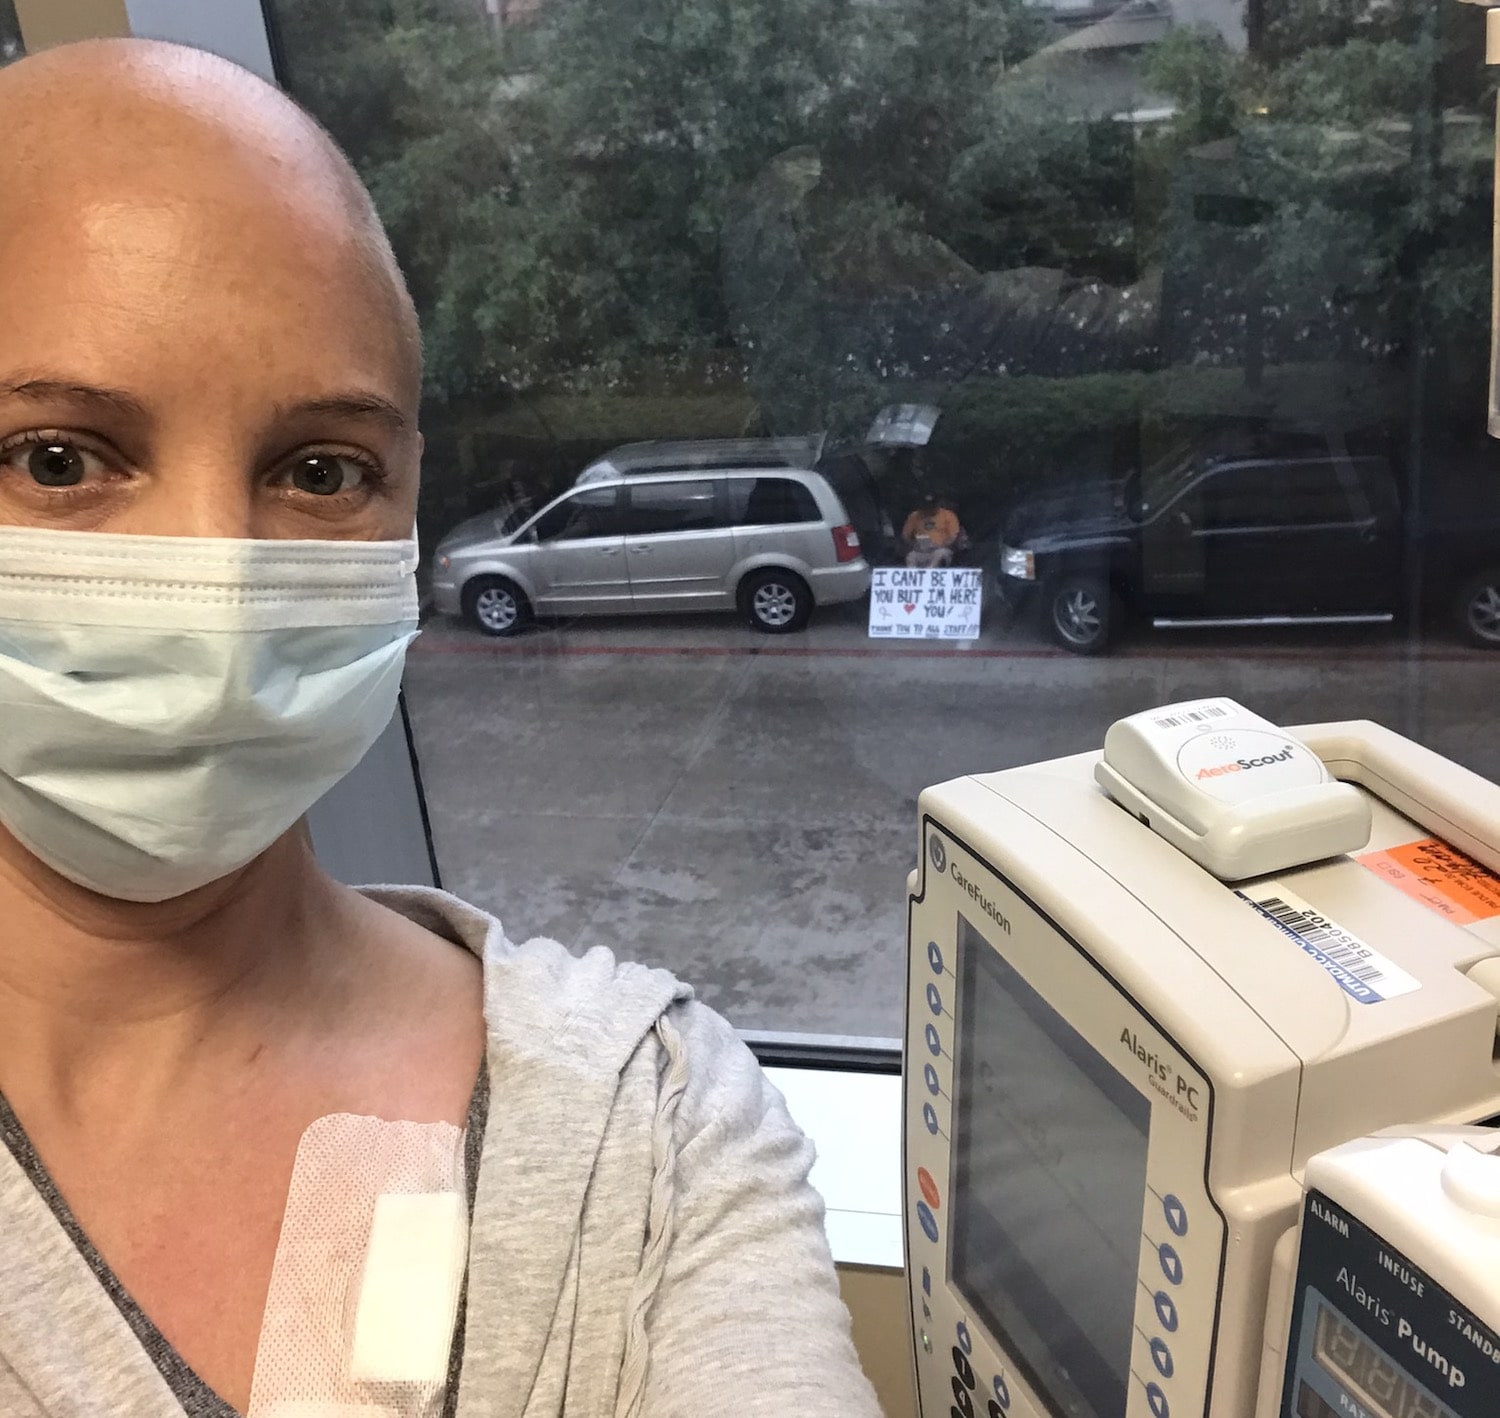 Facing Cancer and a Pandemic at the Same Time